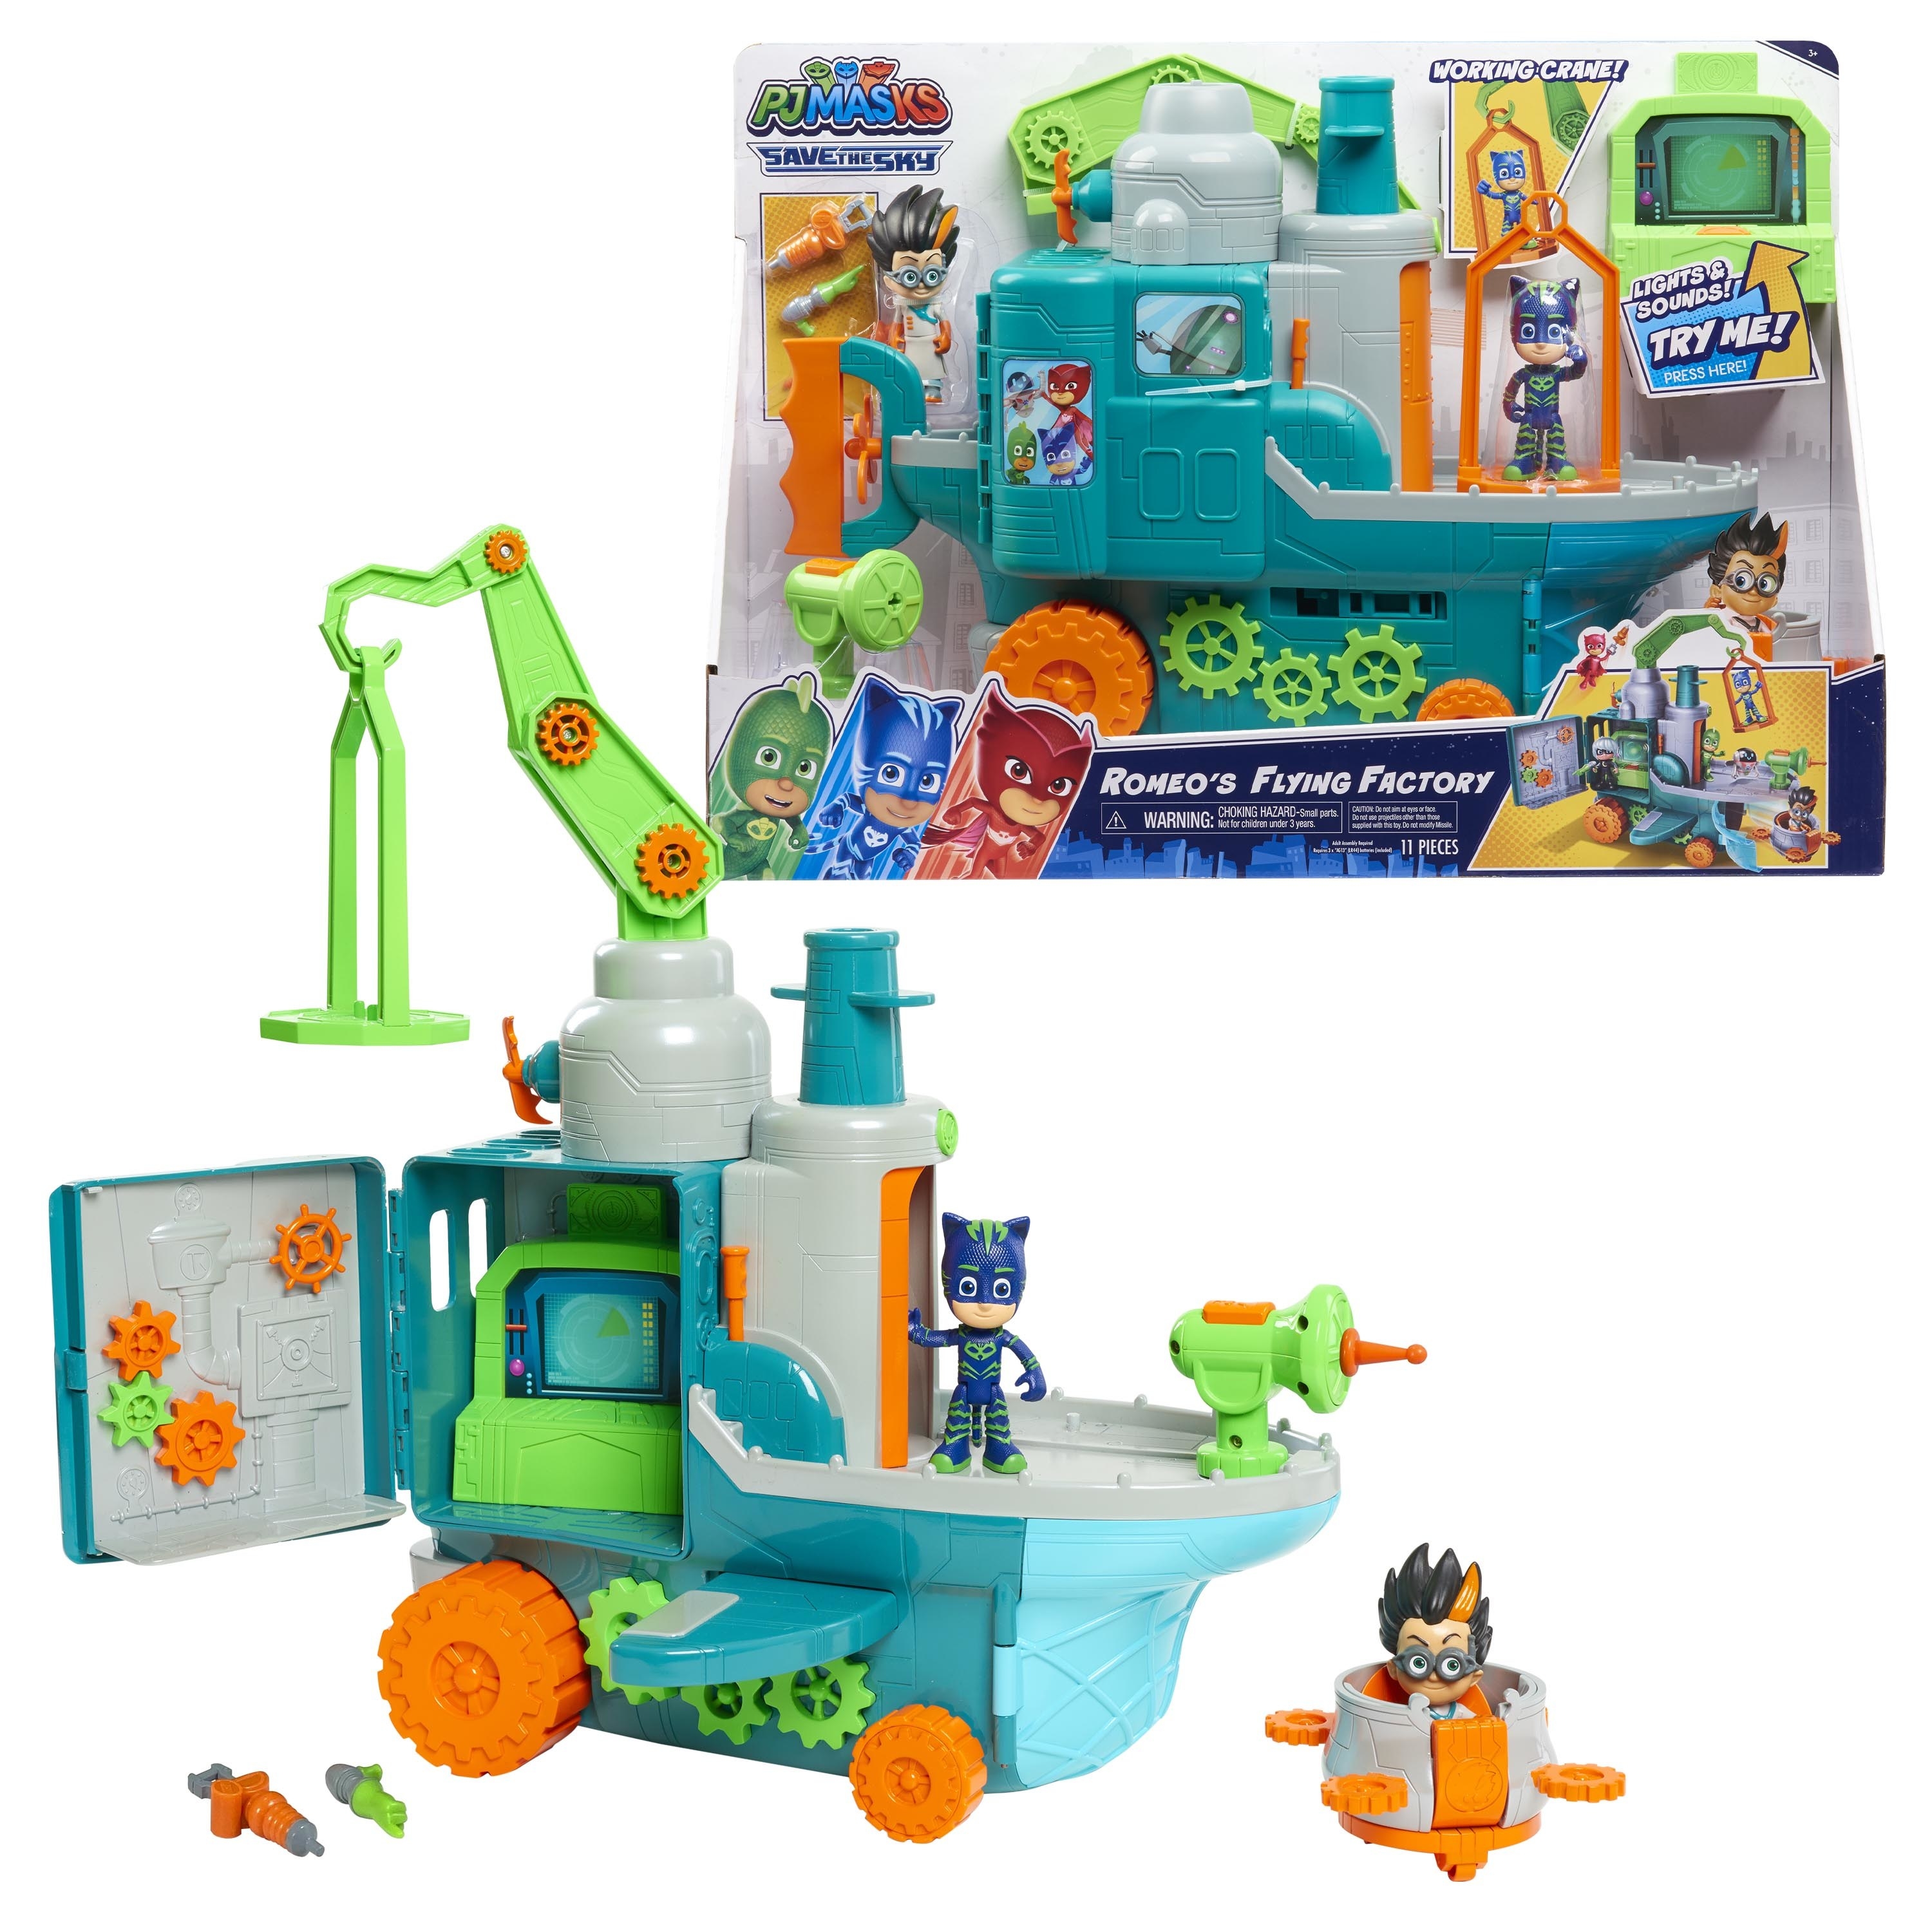 The brightly colored playset and packaging